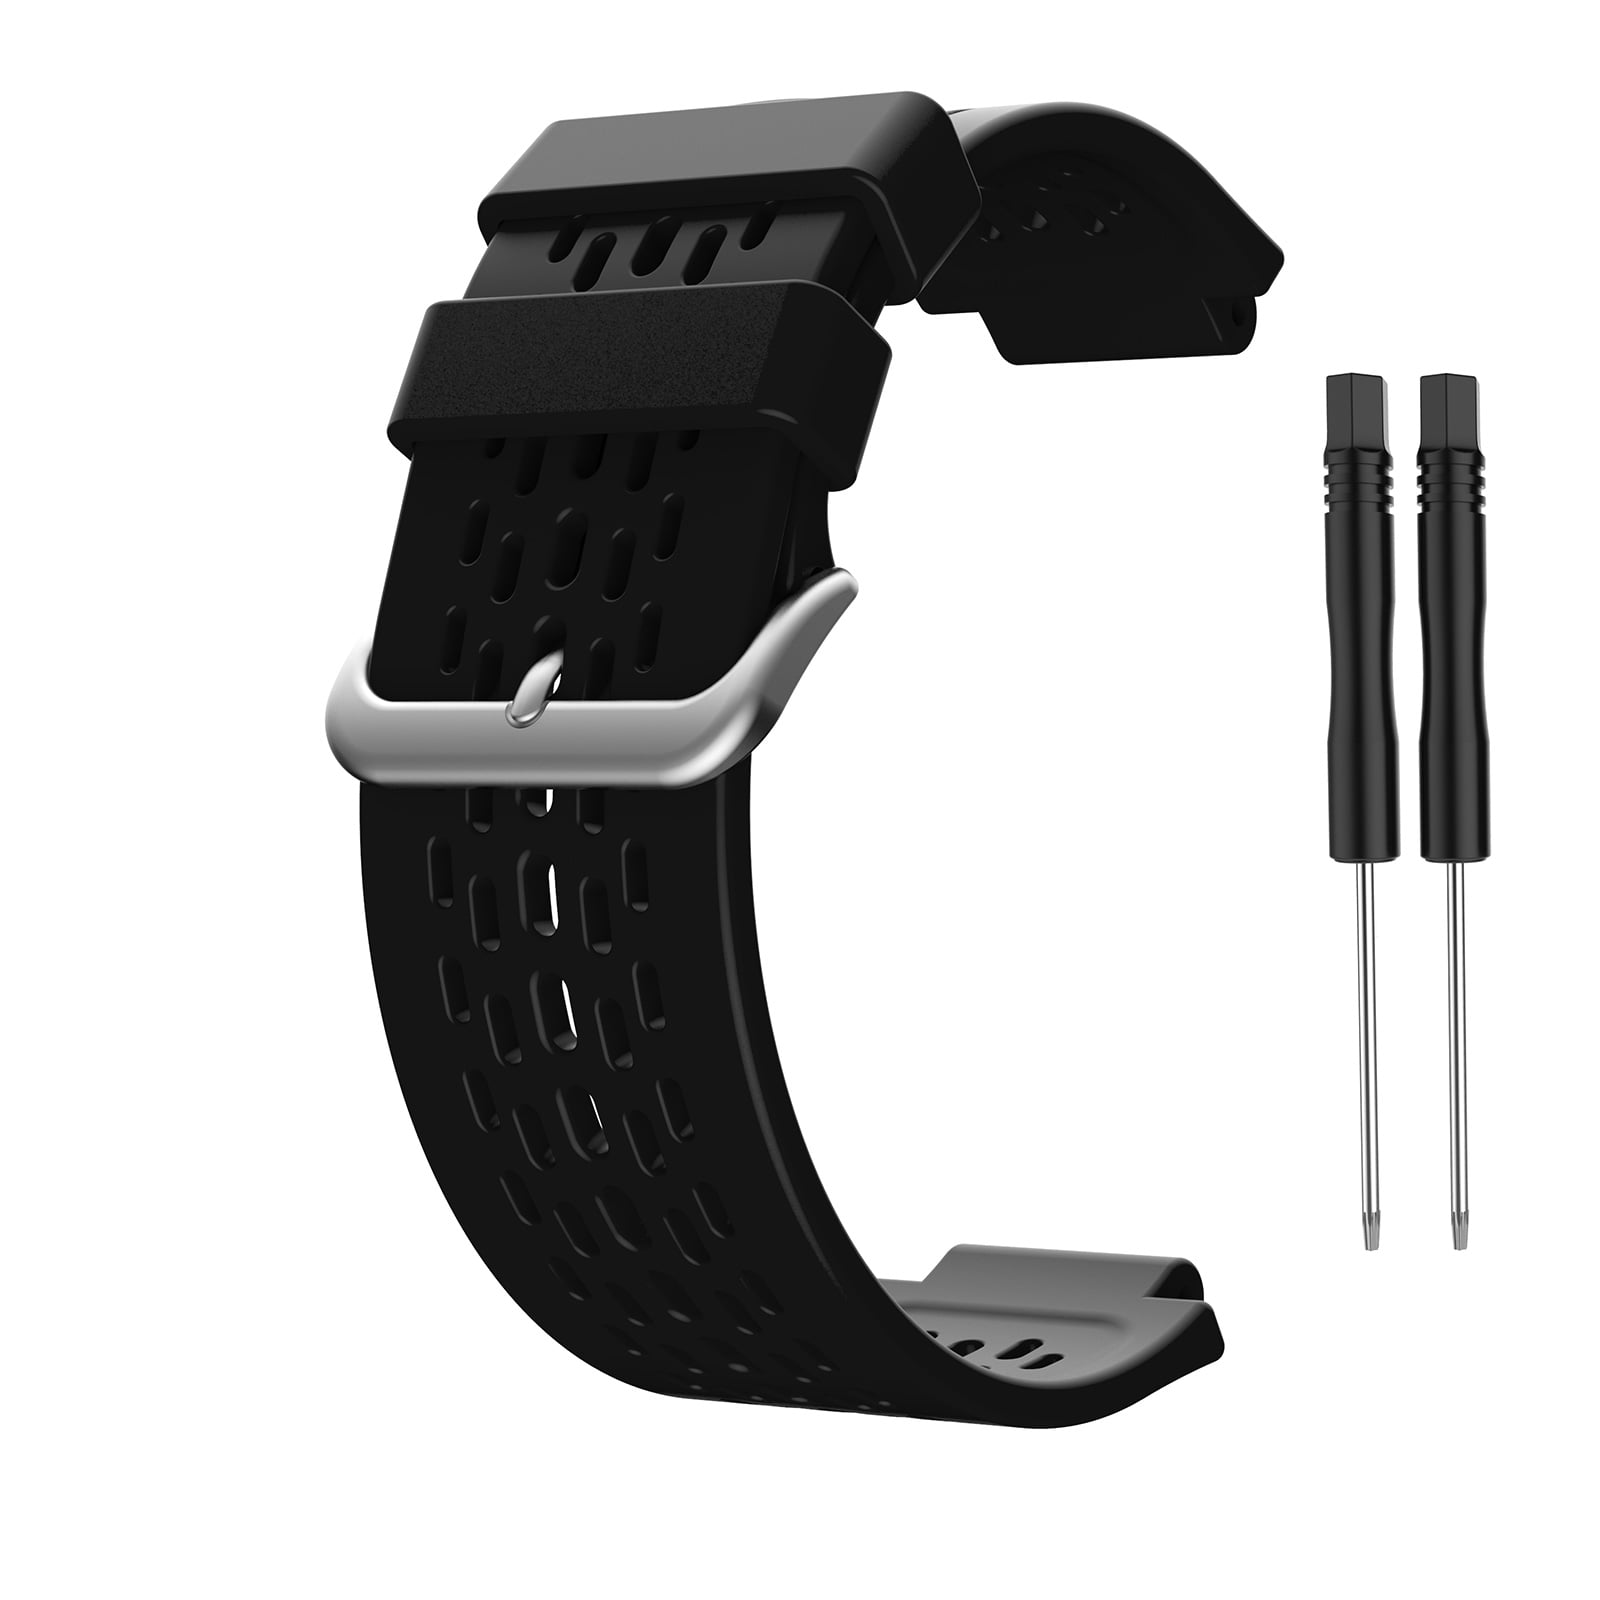 Replacement Silicone Wrist Band Strap & Clasp for Garmin Approach S3 Black 